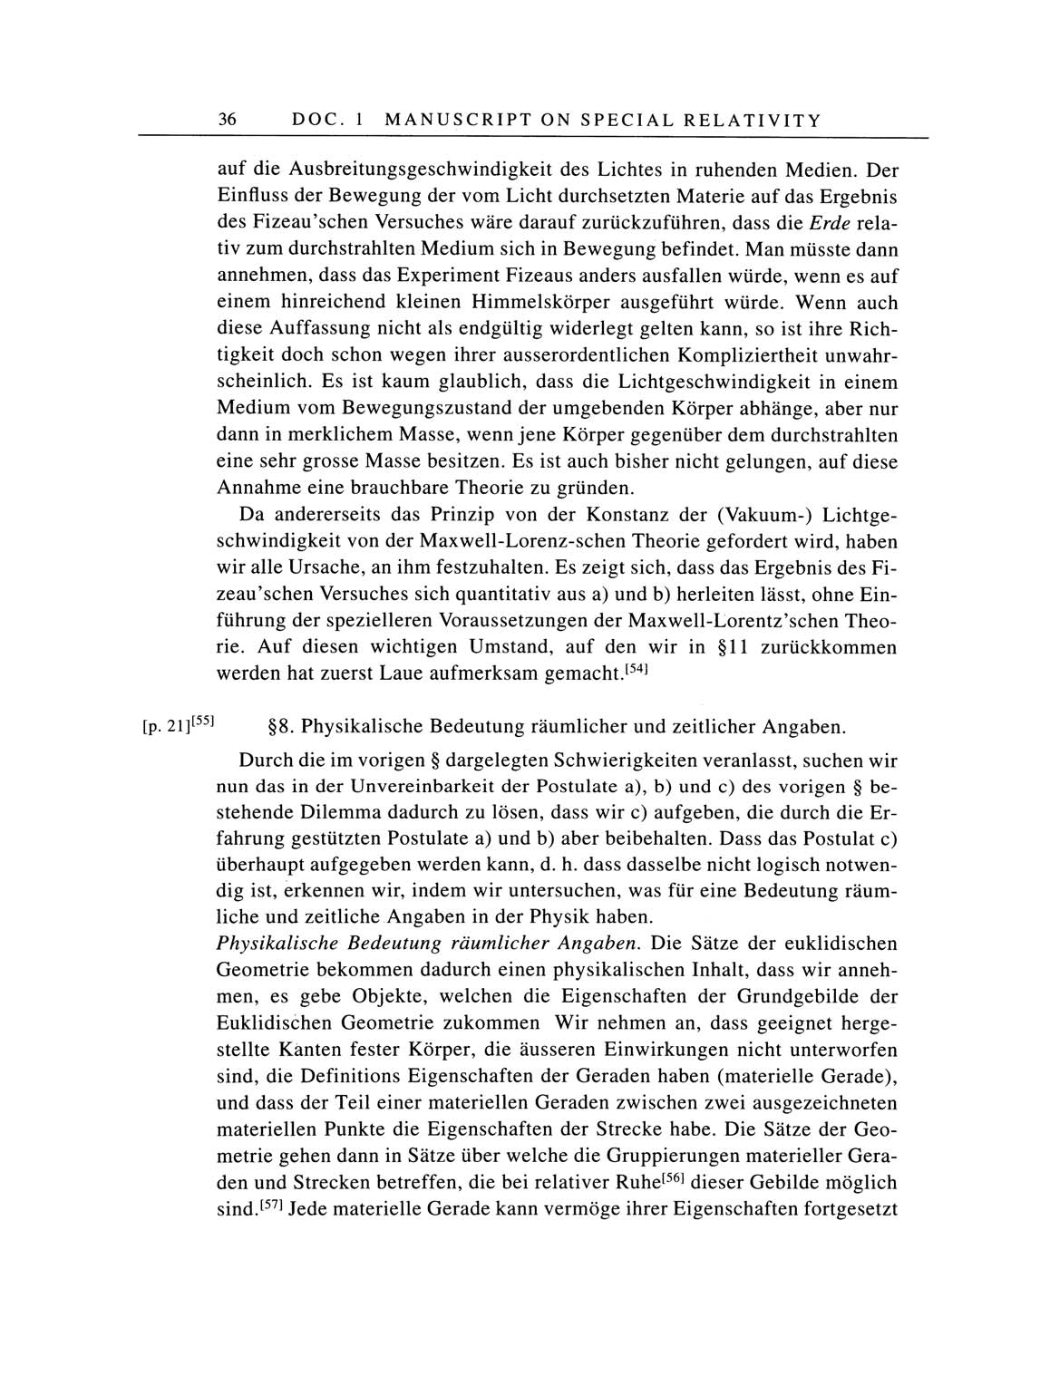 Volume 4: The Swiss Years: Writings 1912-1914 page 36